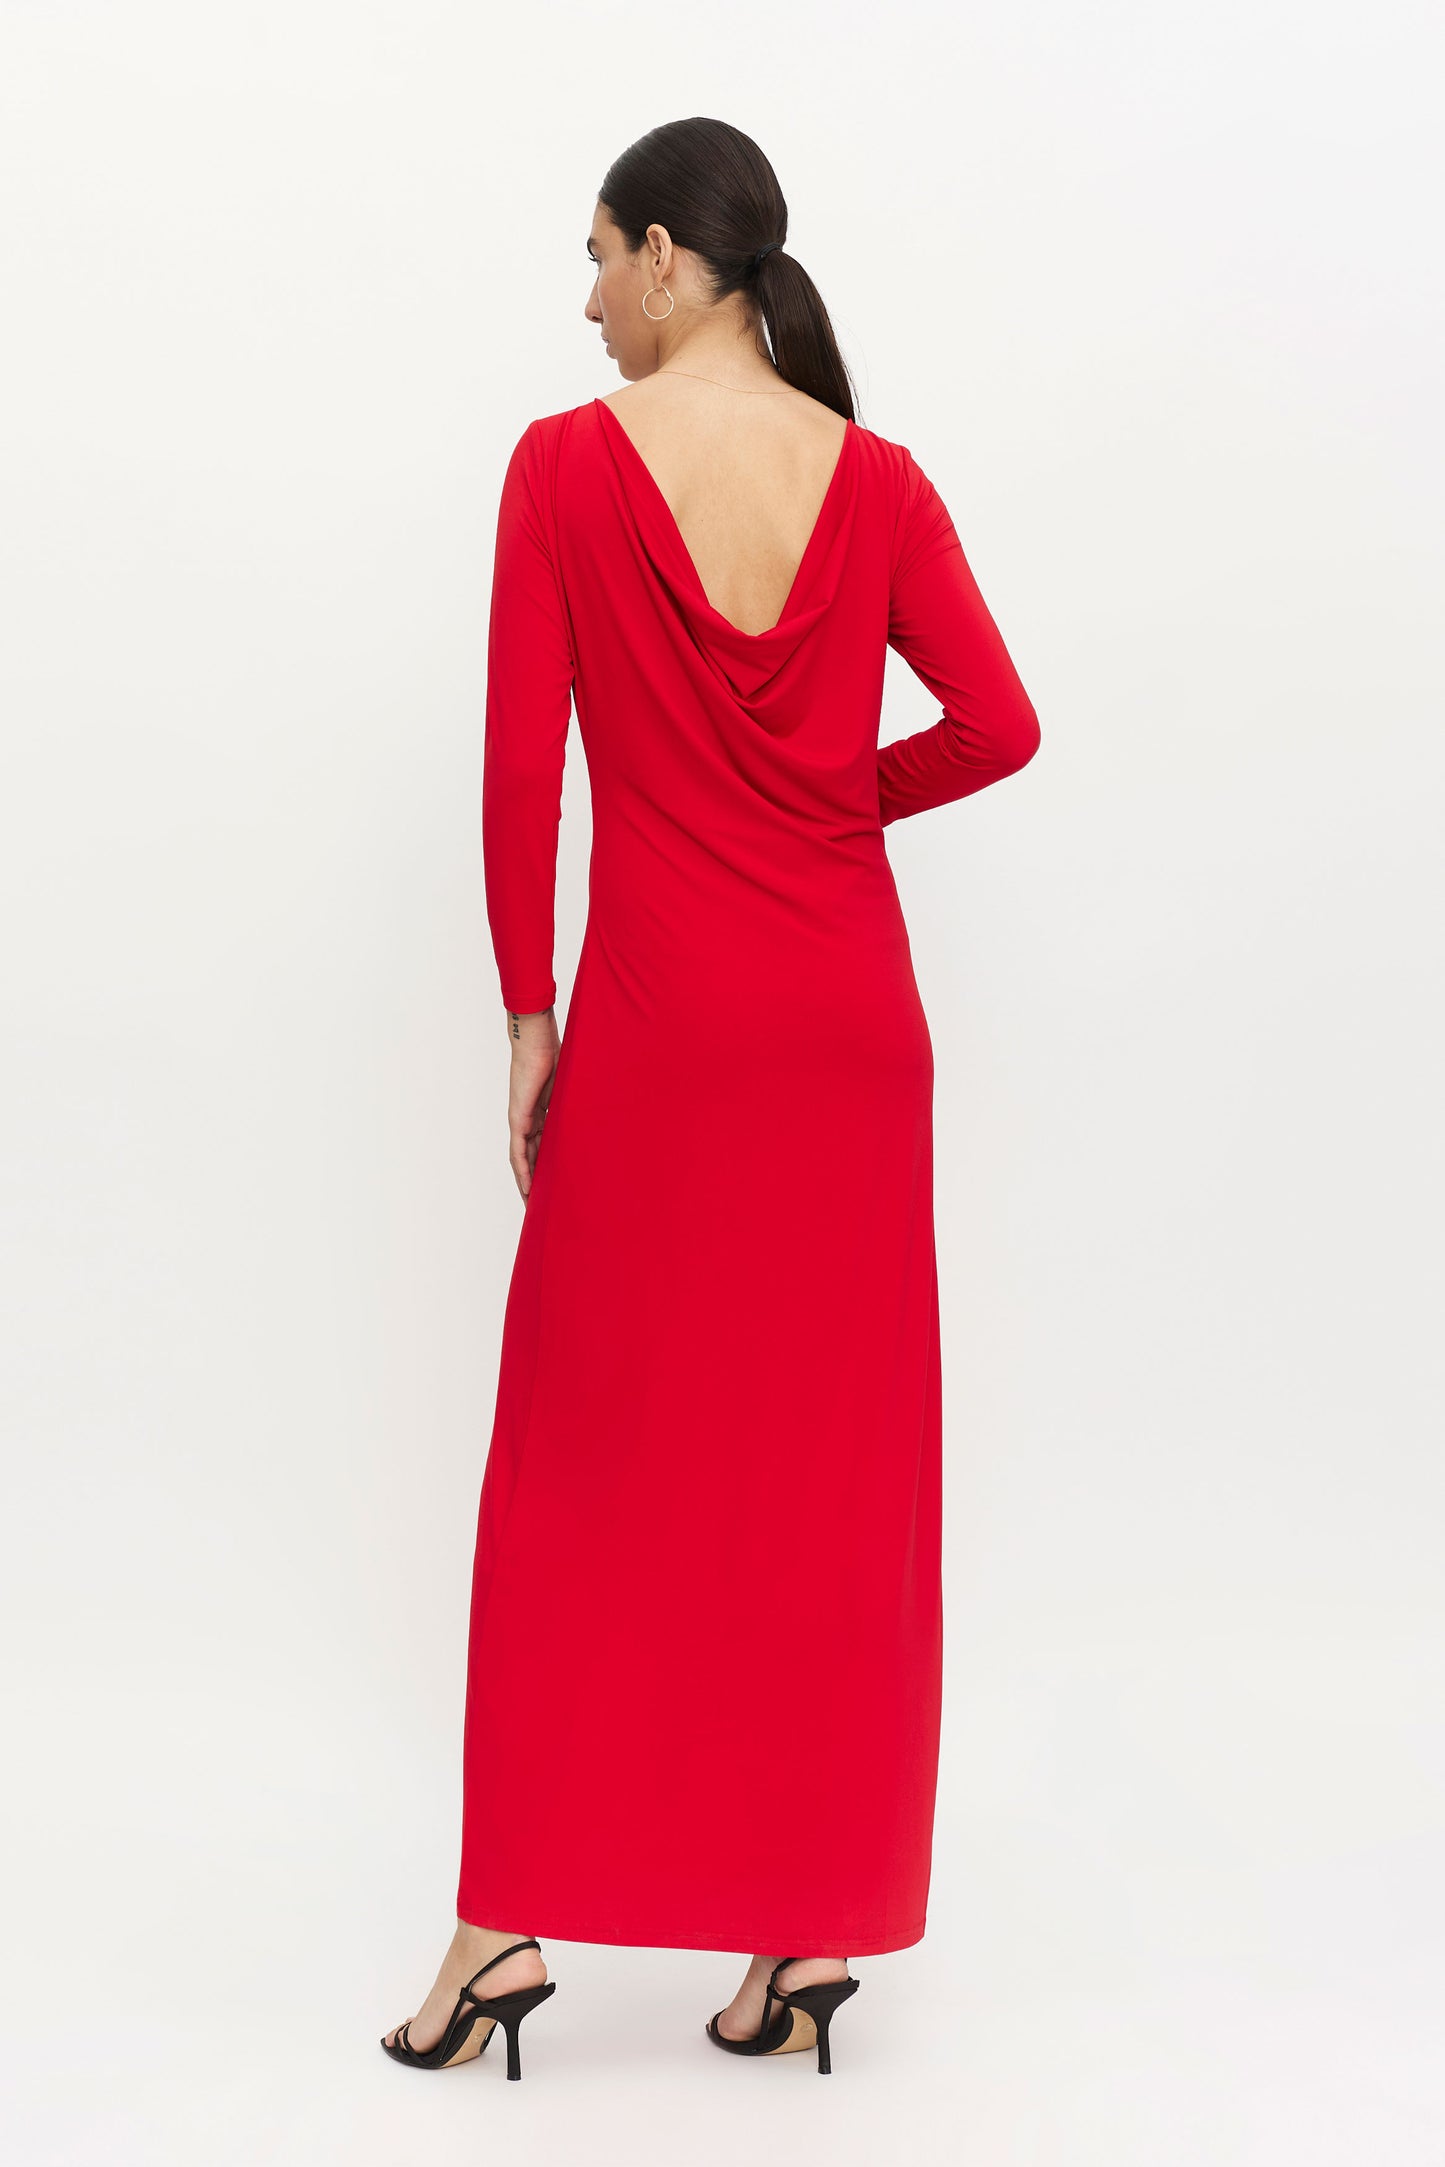 Long red dress with back neckline